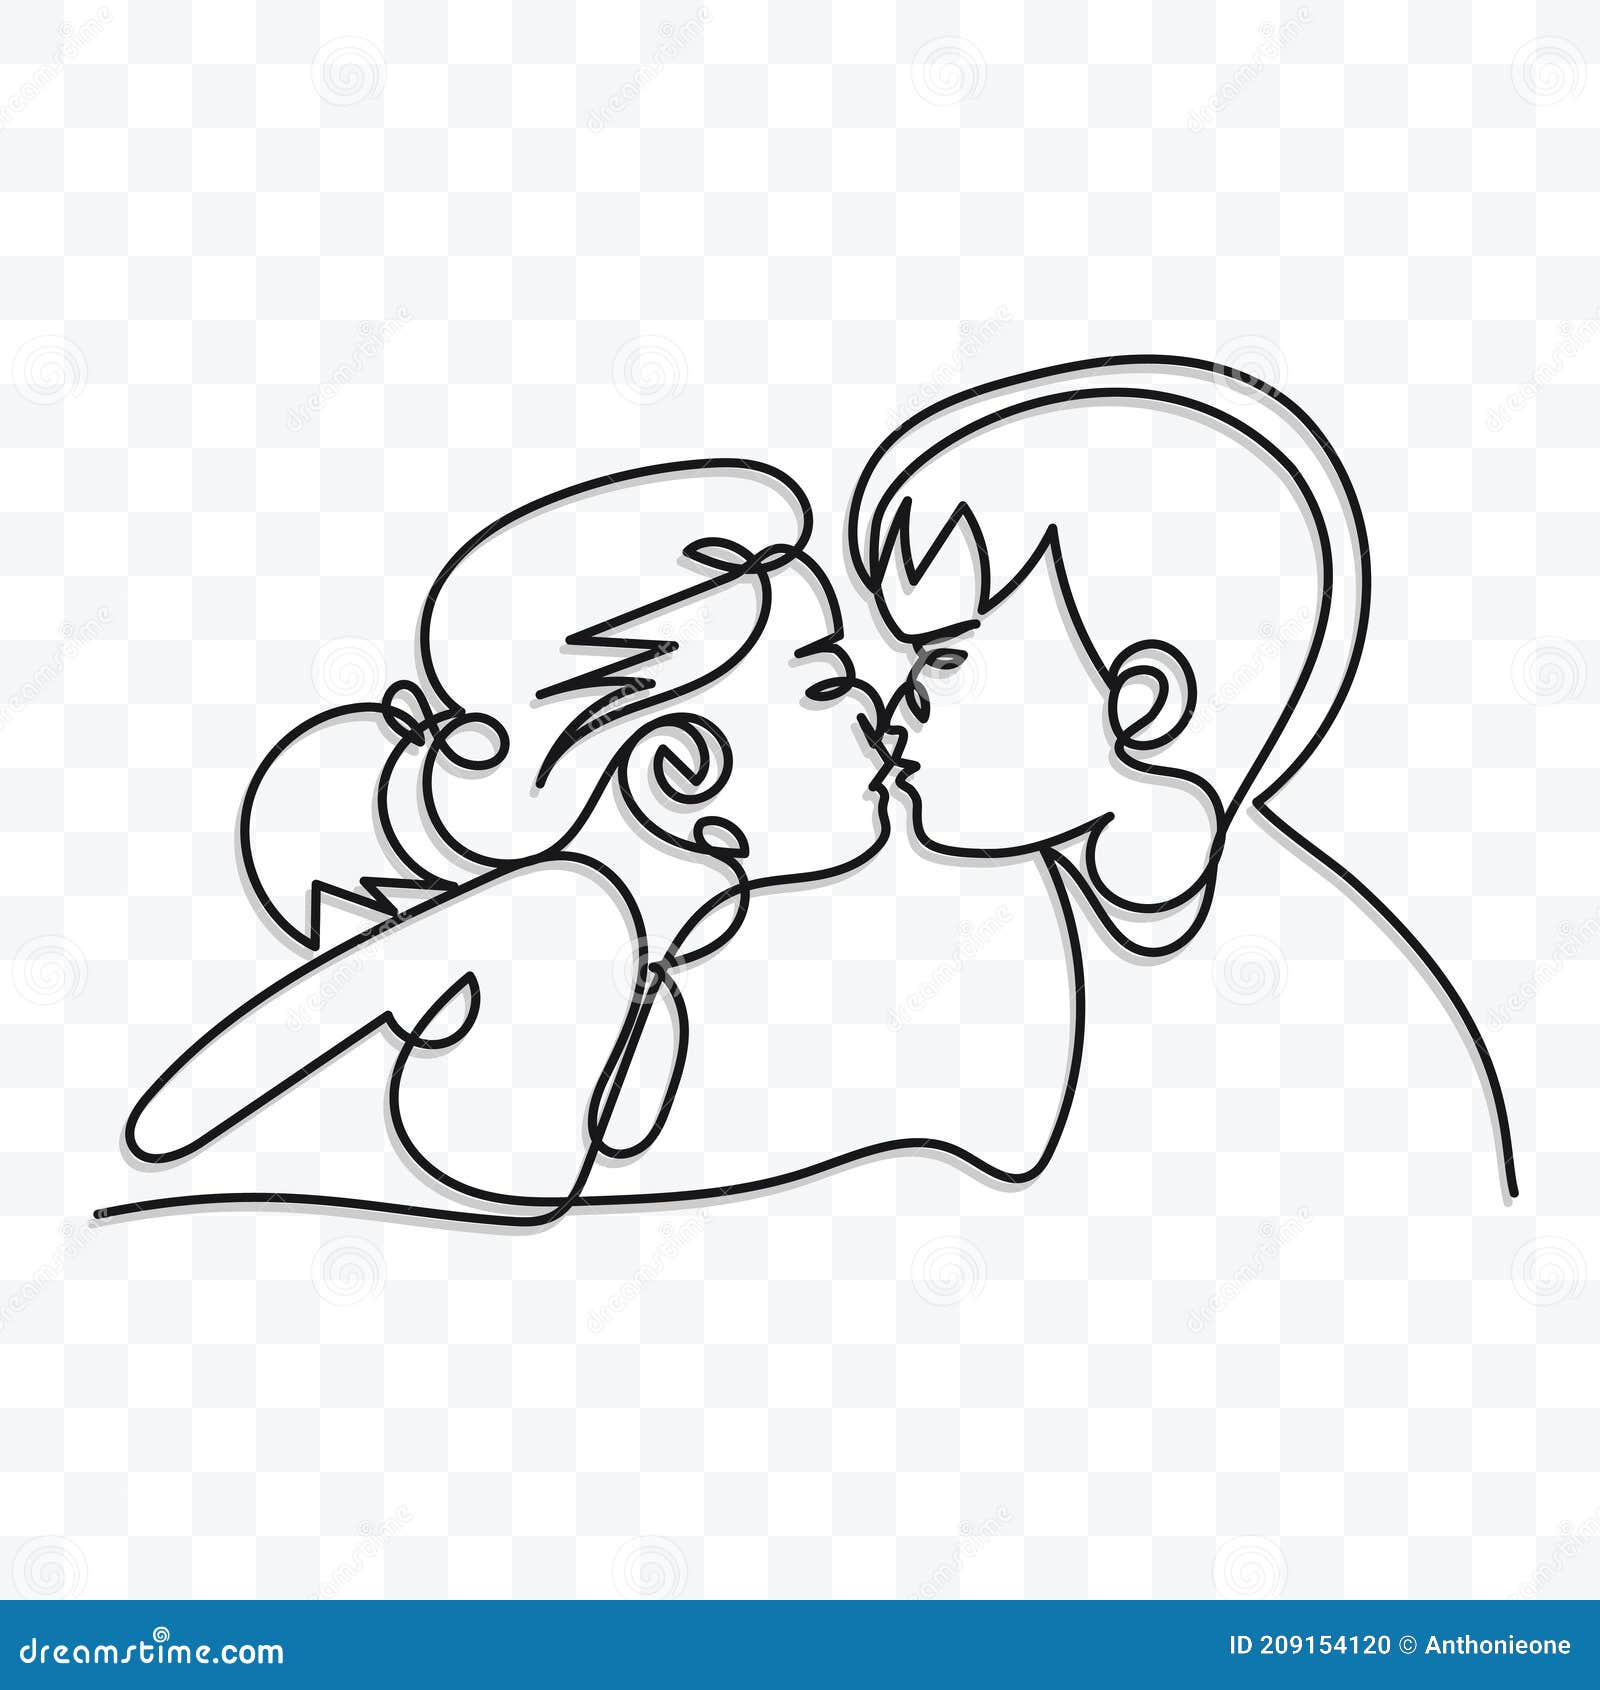 How to Draw Couple Kissing